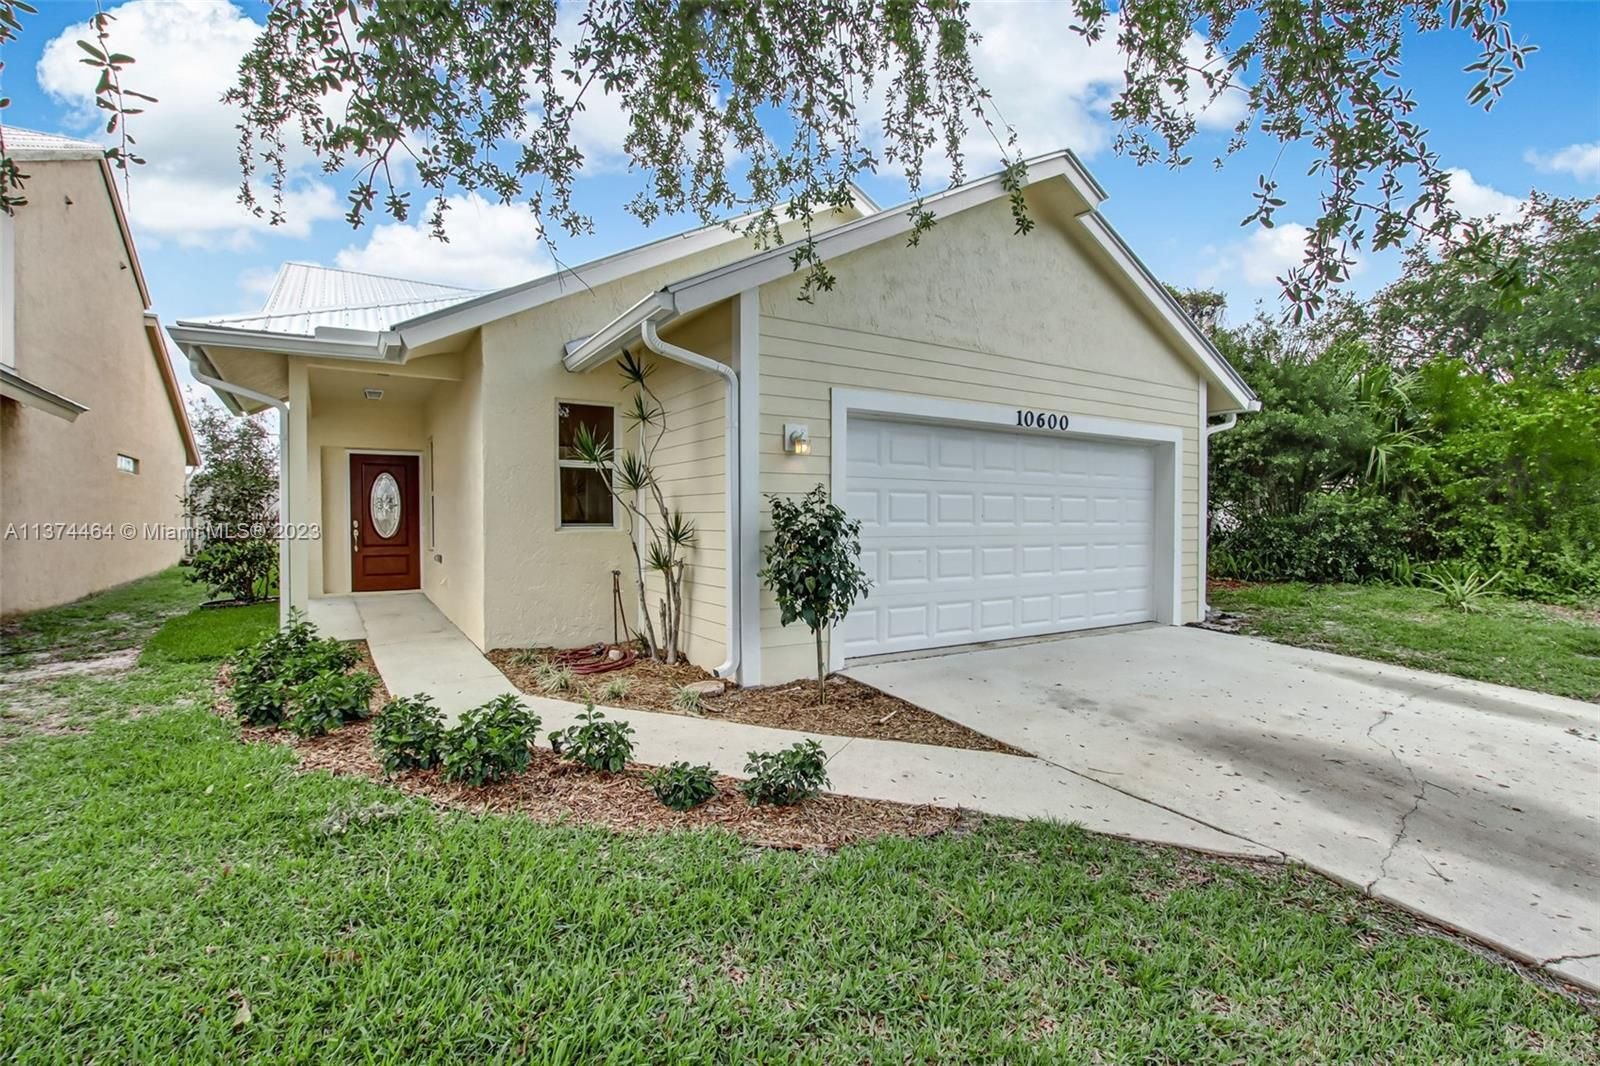 Real estate property located at 10600 Rosemarie Ct, Martin County, Hobe Sound, FL